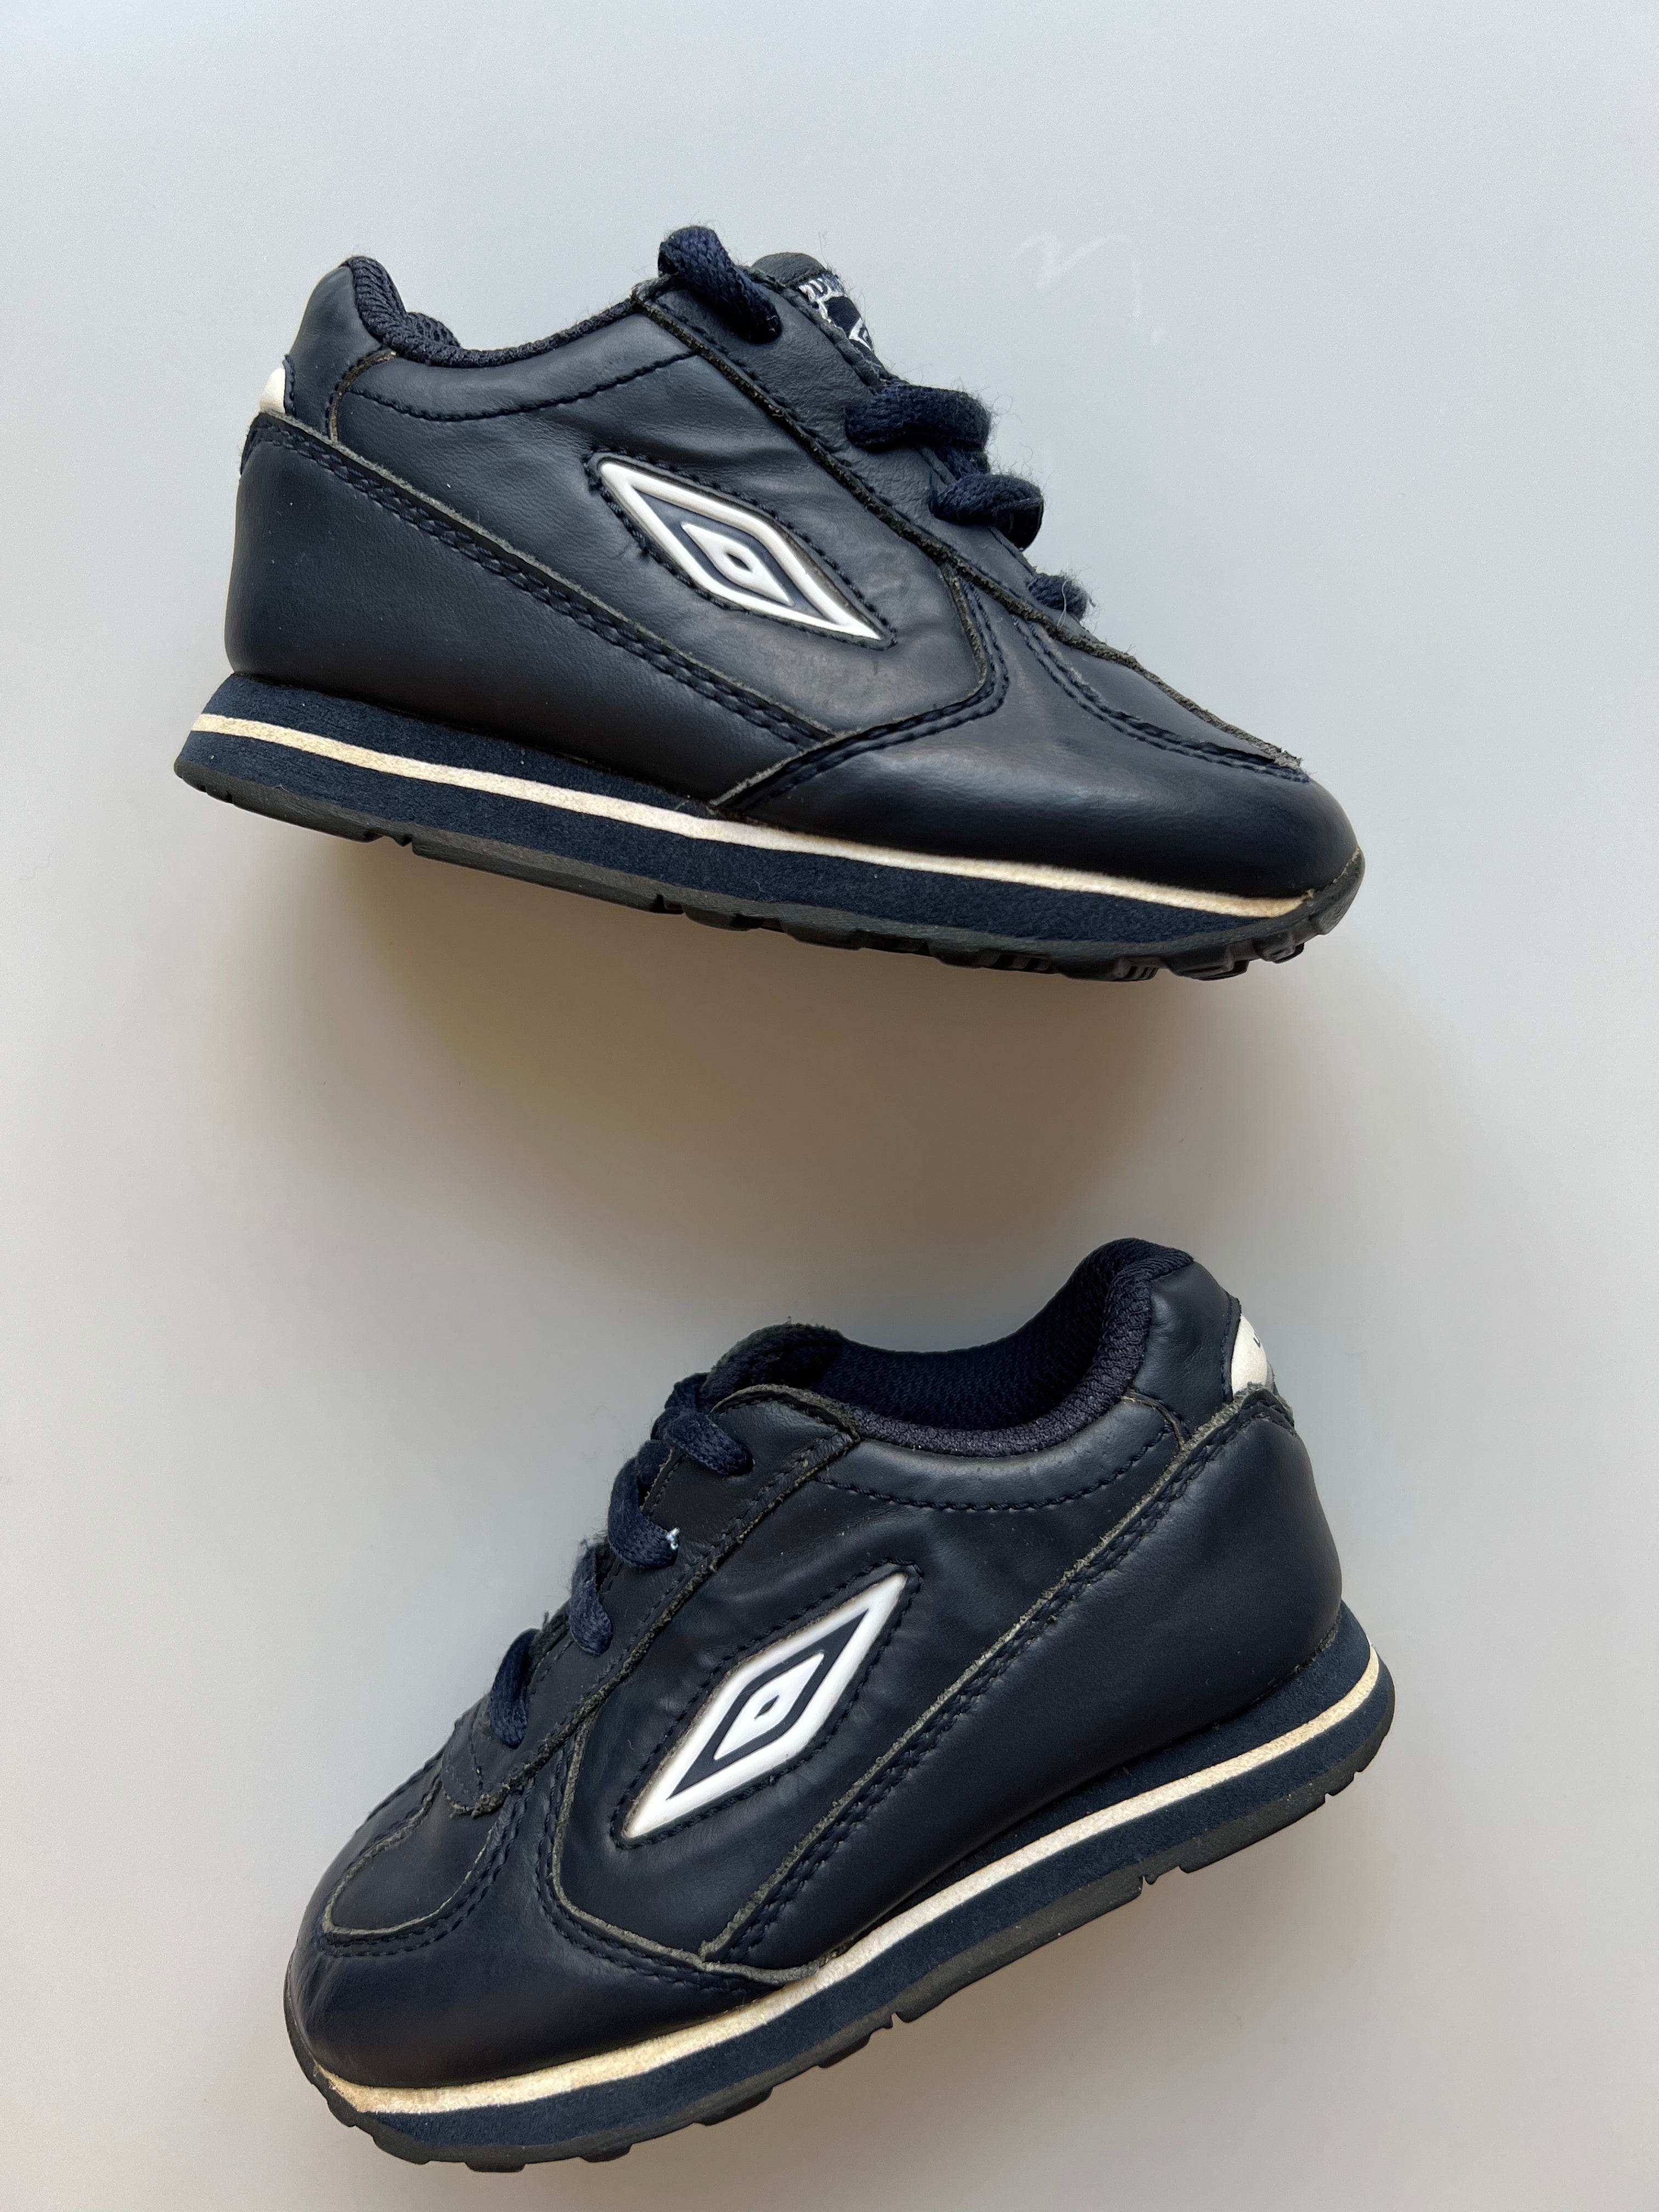 Umbro Vintage Navy Leather Toddler Sneakers Size 7